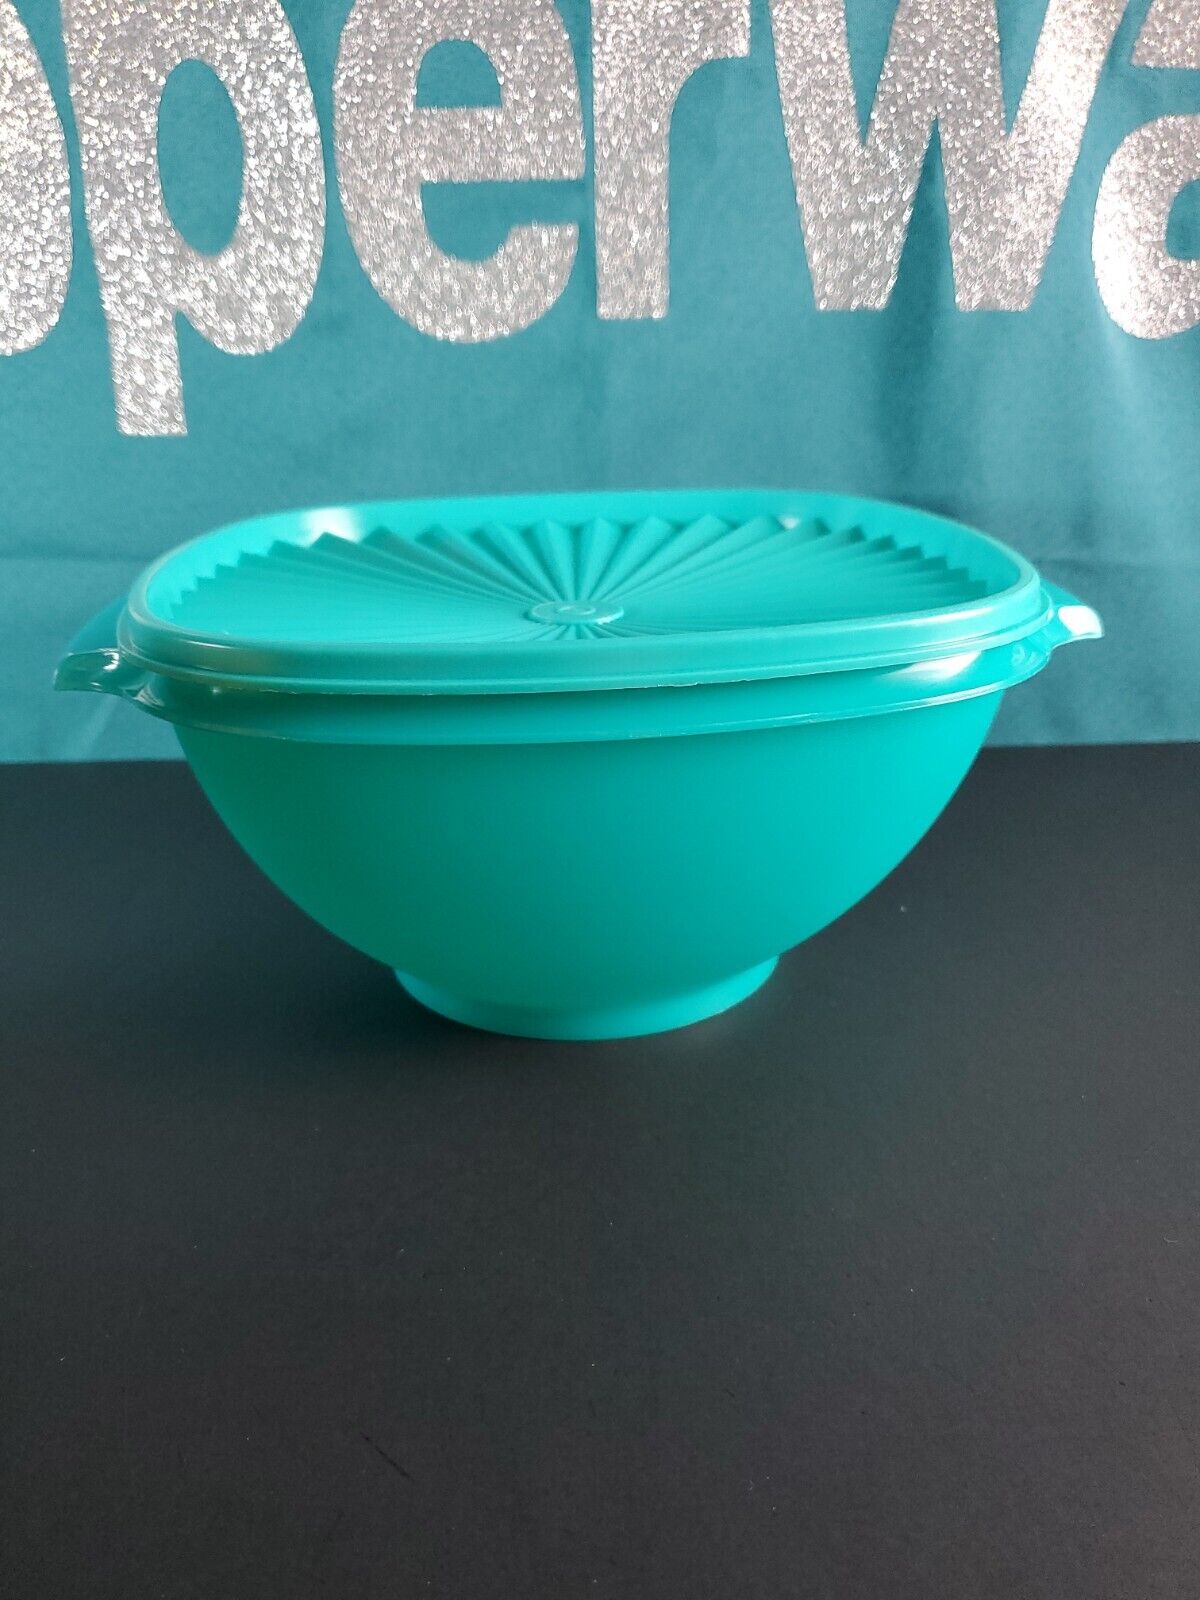 Tupperware Servalier Bowl 2.8L / 11.75 Cups Green Teal Sale New